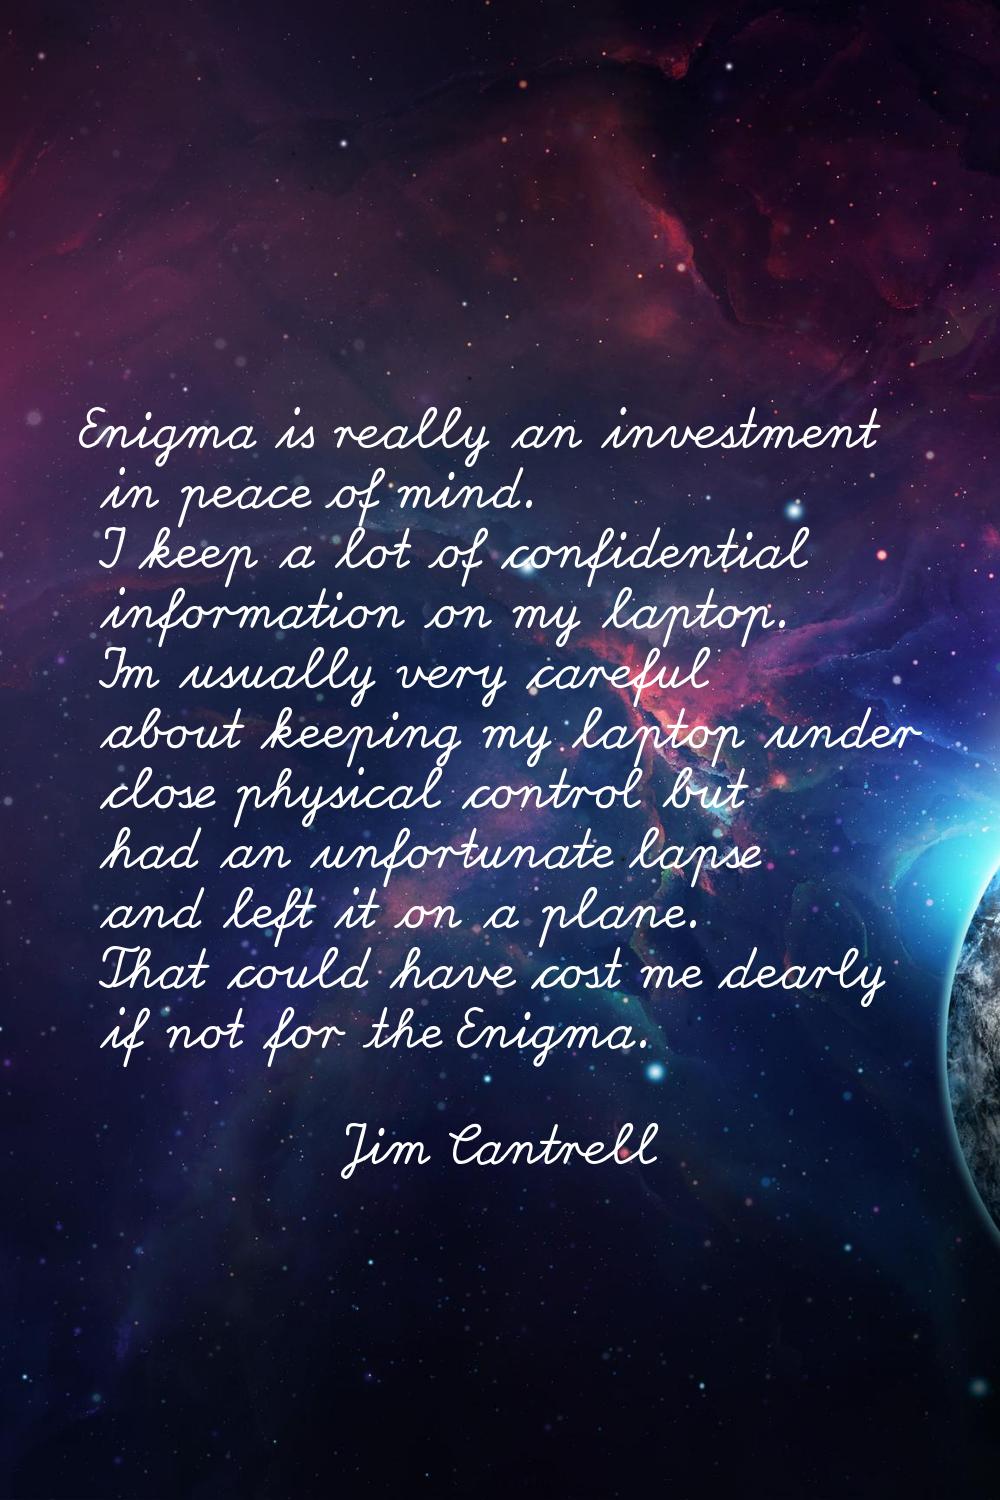 Enigma is really an investment in peace of mind. I keep a lot of confidential information on my lap